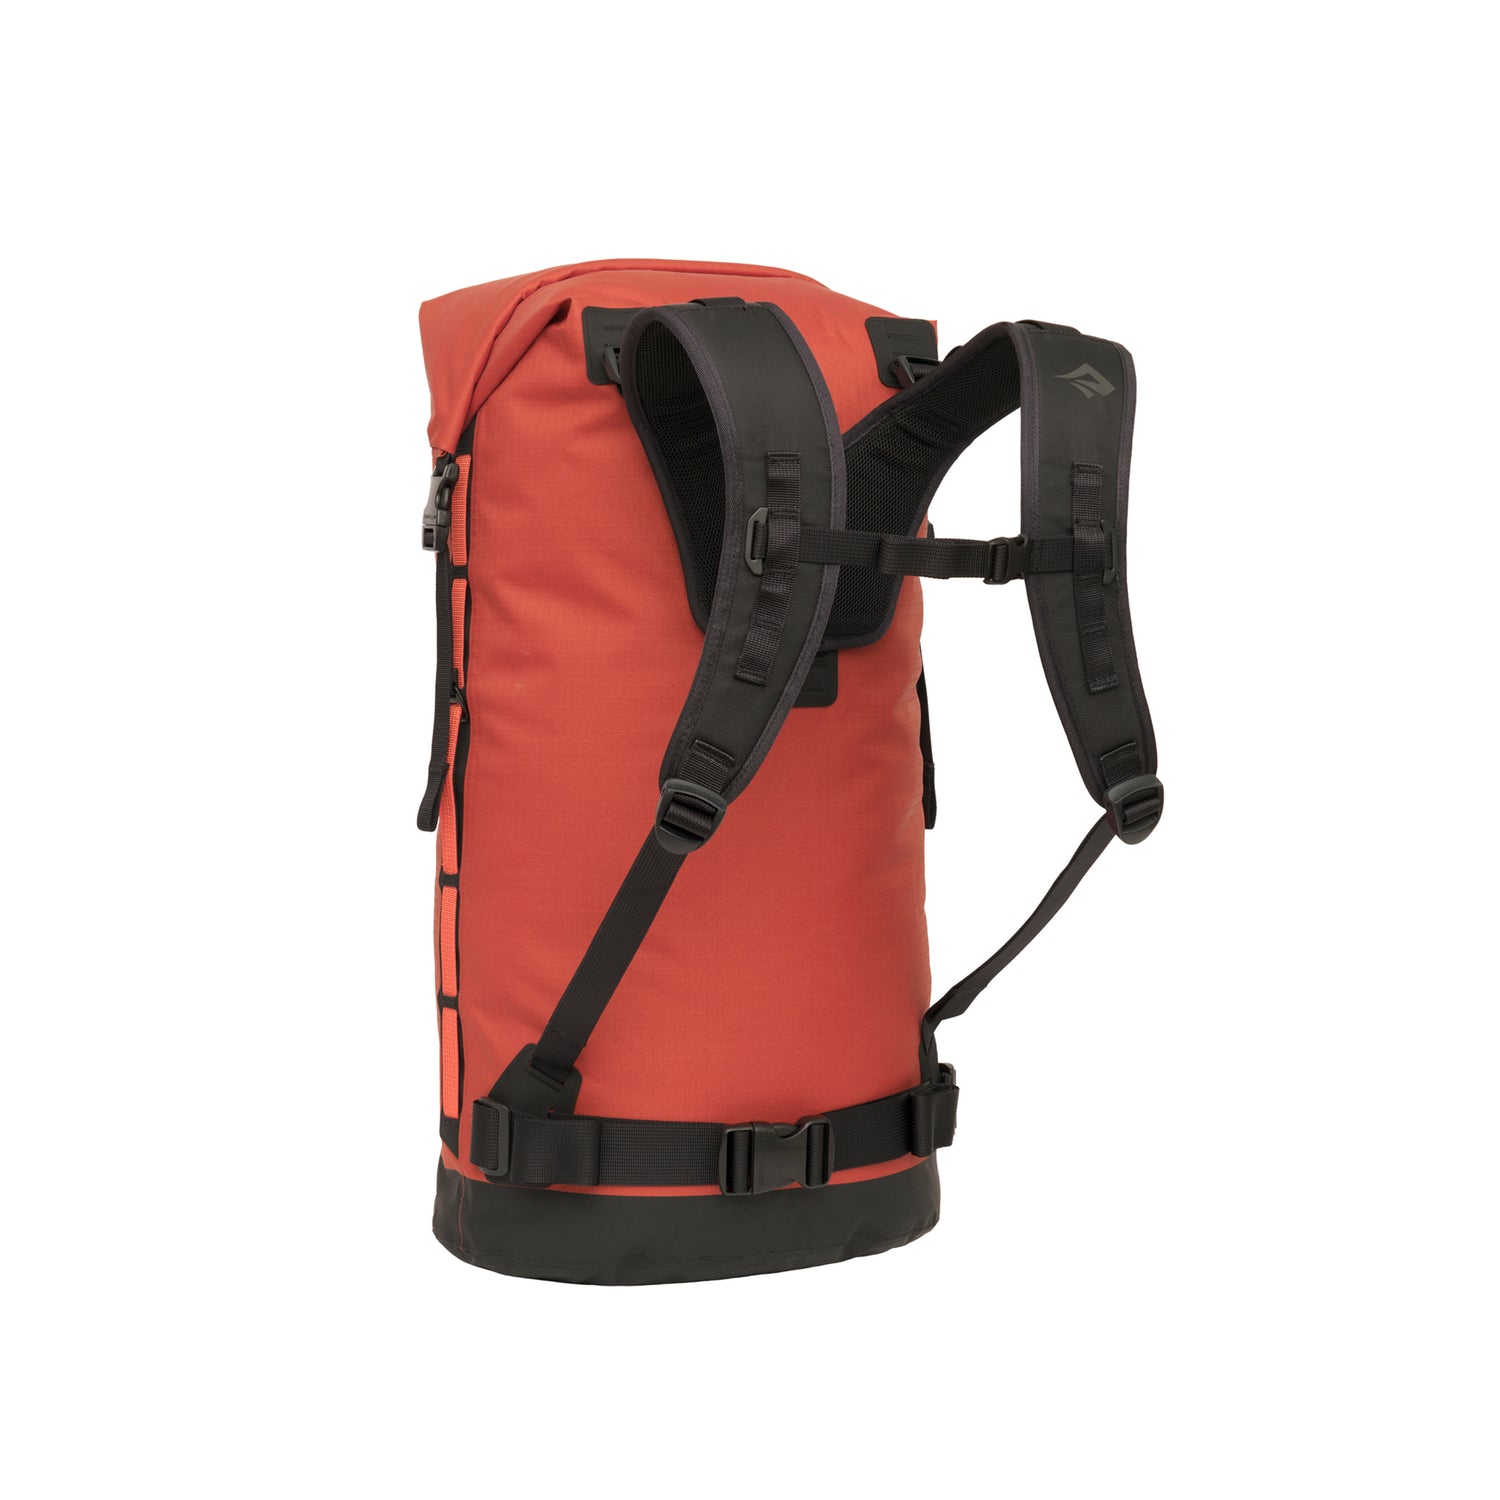 50 liter || Big River Dry Backpack Picante